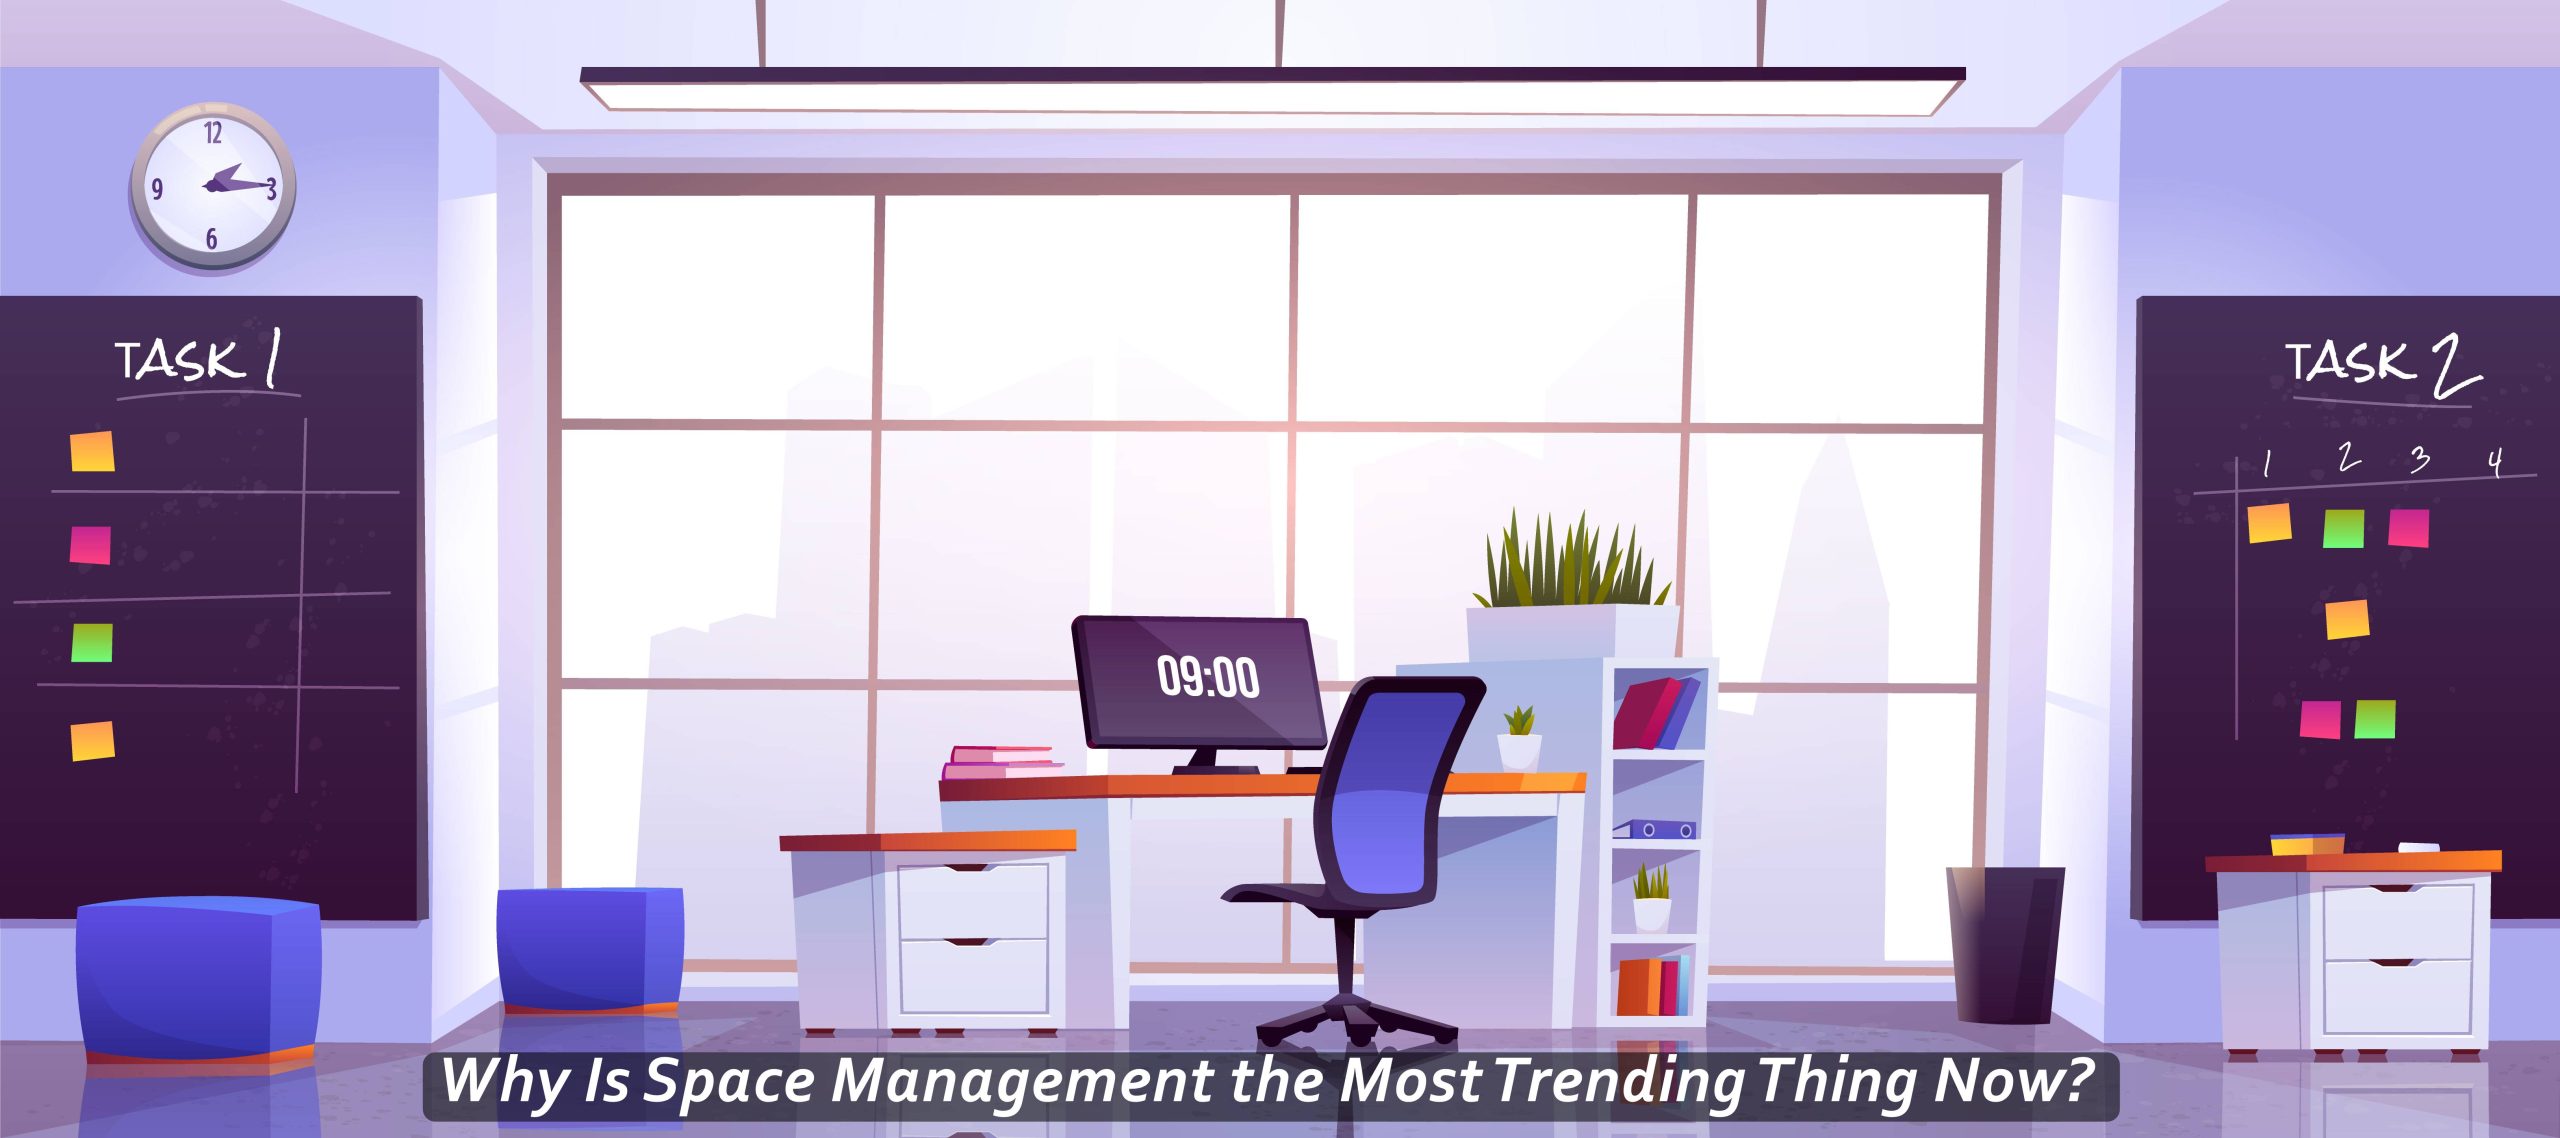 Why Is Space Management the Most Trending Thing Now?